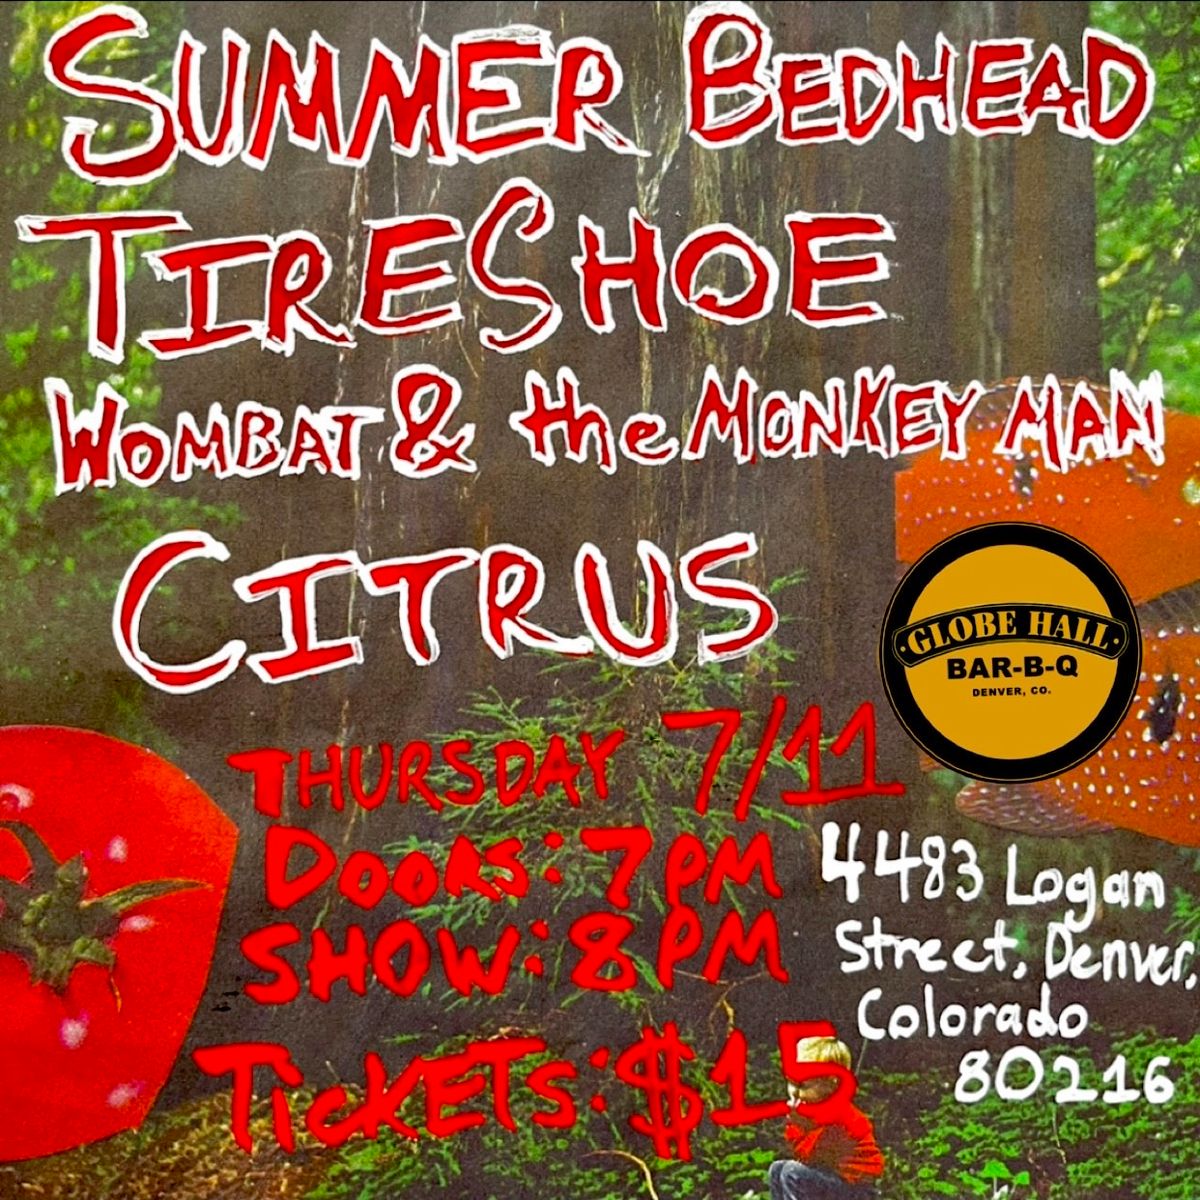 Summer Bedhead w\/ Wombat and The Monkey Man, Tire Shoe + Citrus